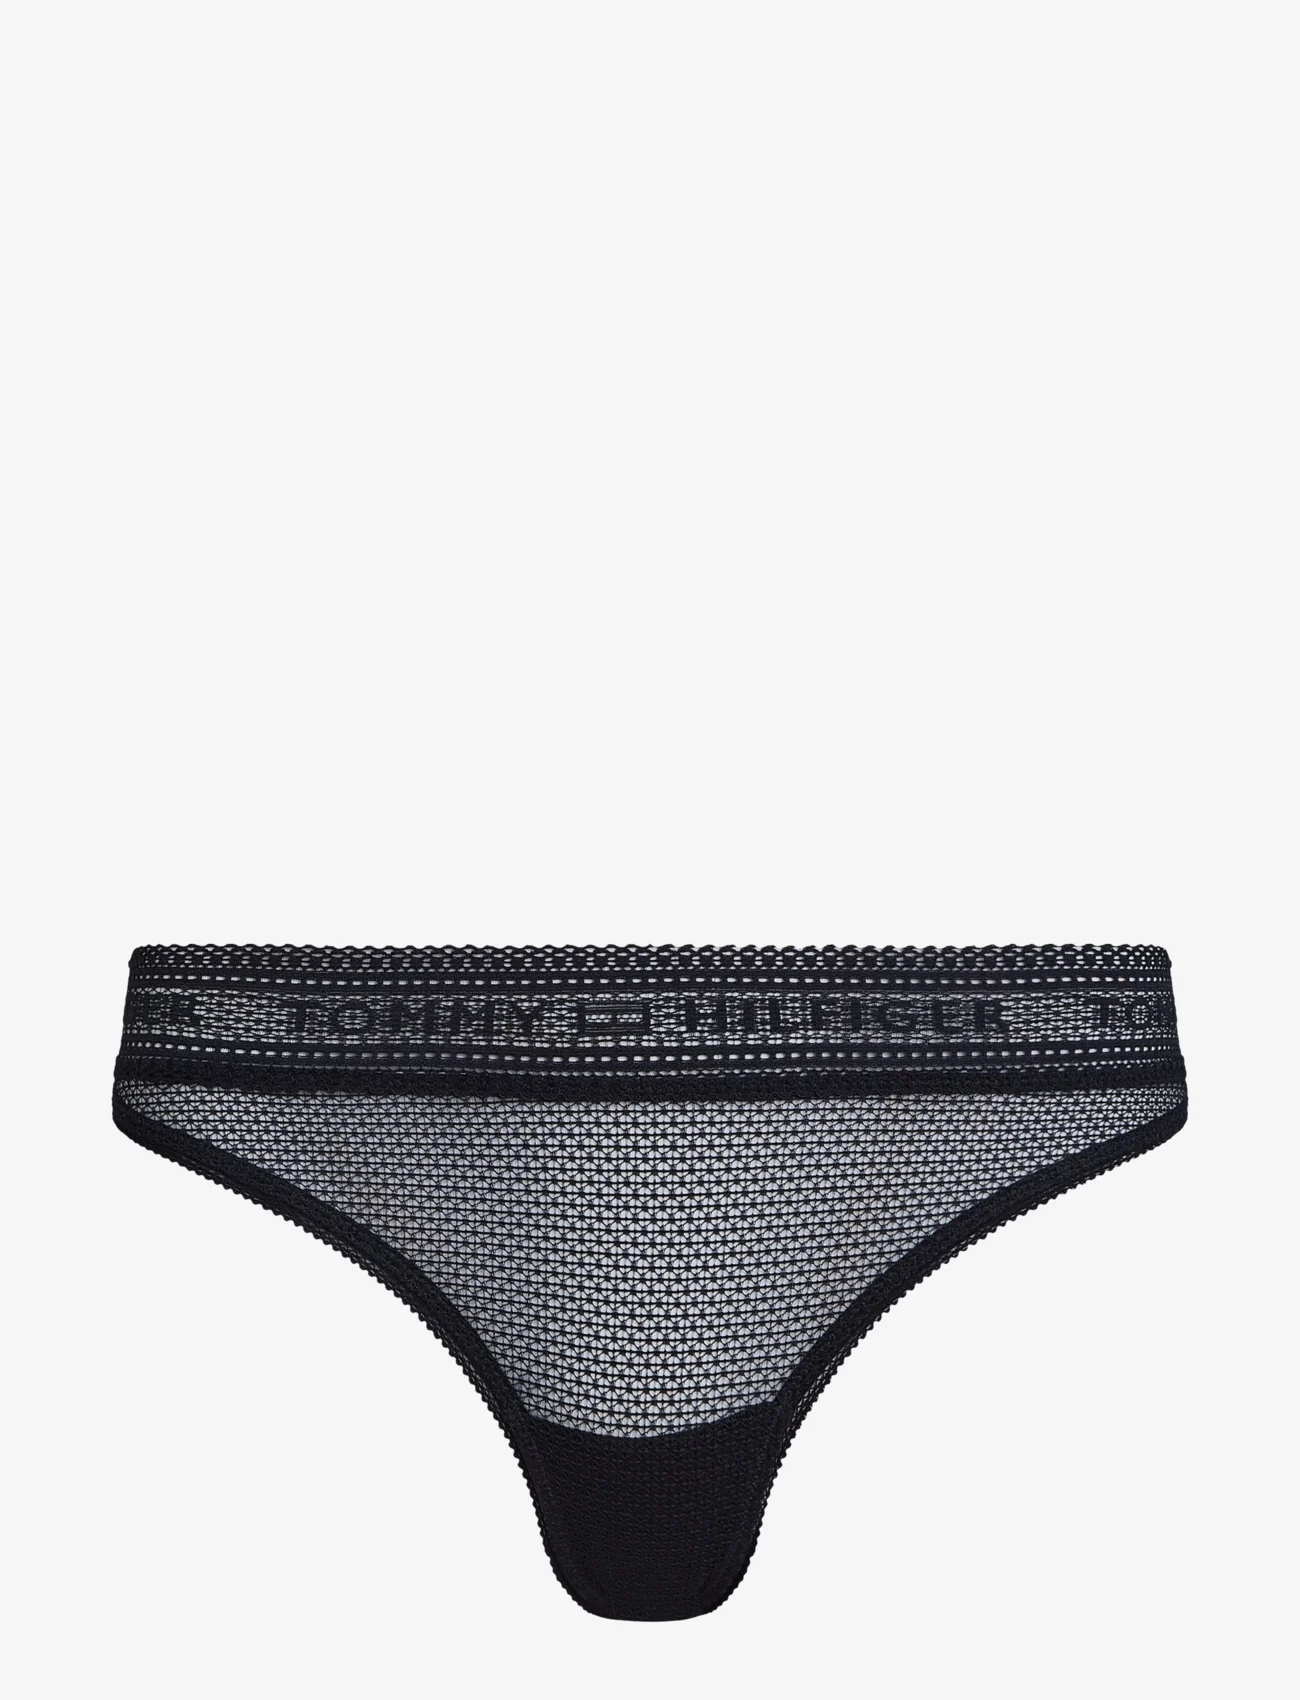 Tommy Hilfiger - THONG (EXT. SIZE) - lowest prices - desert sky - 0